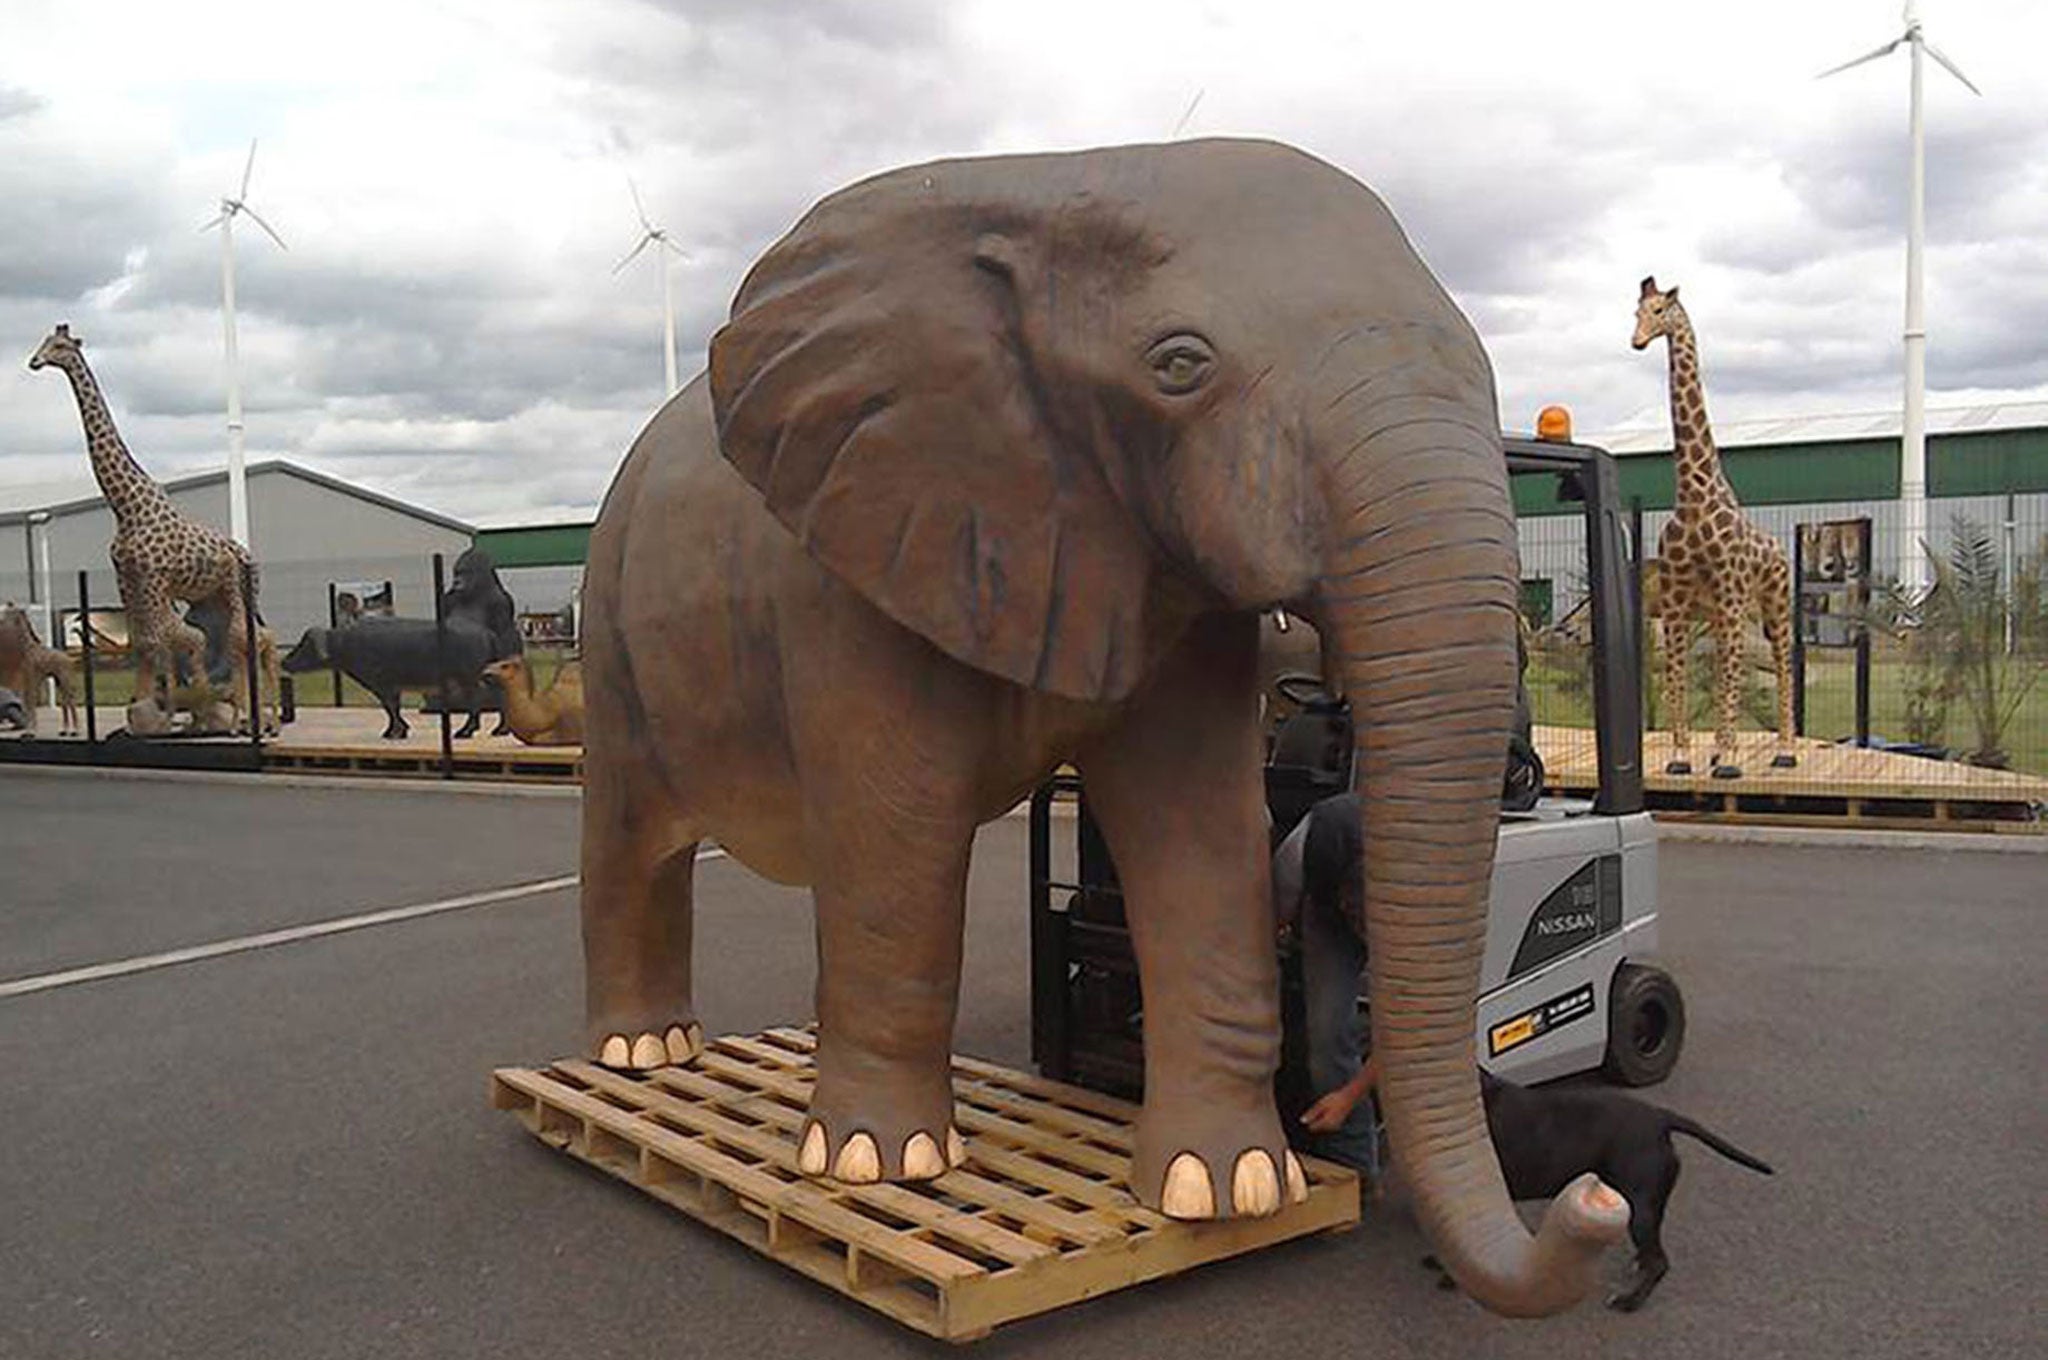 A 10ft plastic replica elephant, which represented Jeremy Clarkson in the 'final' Top Gear